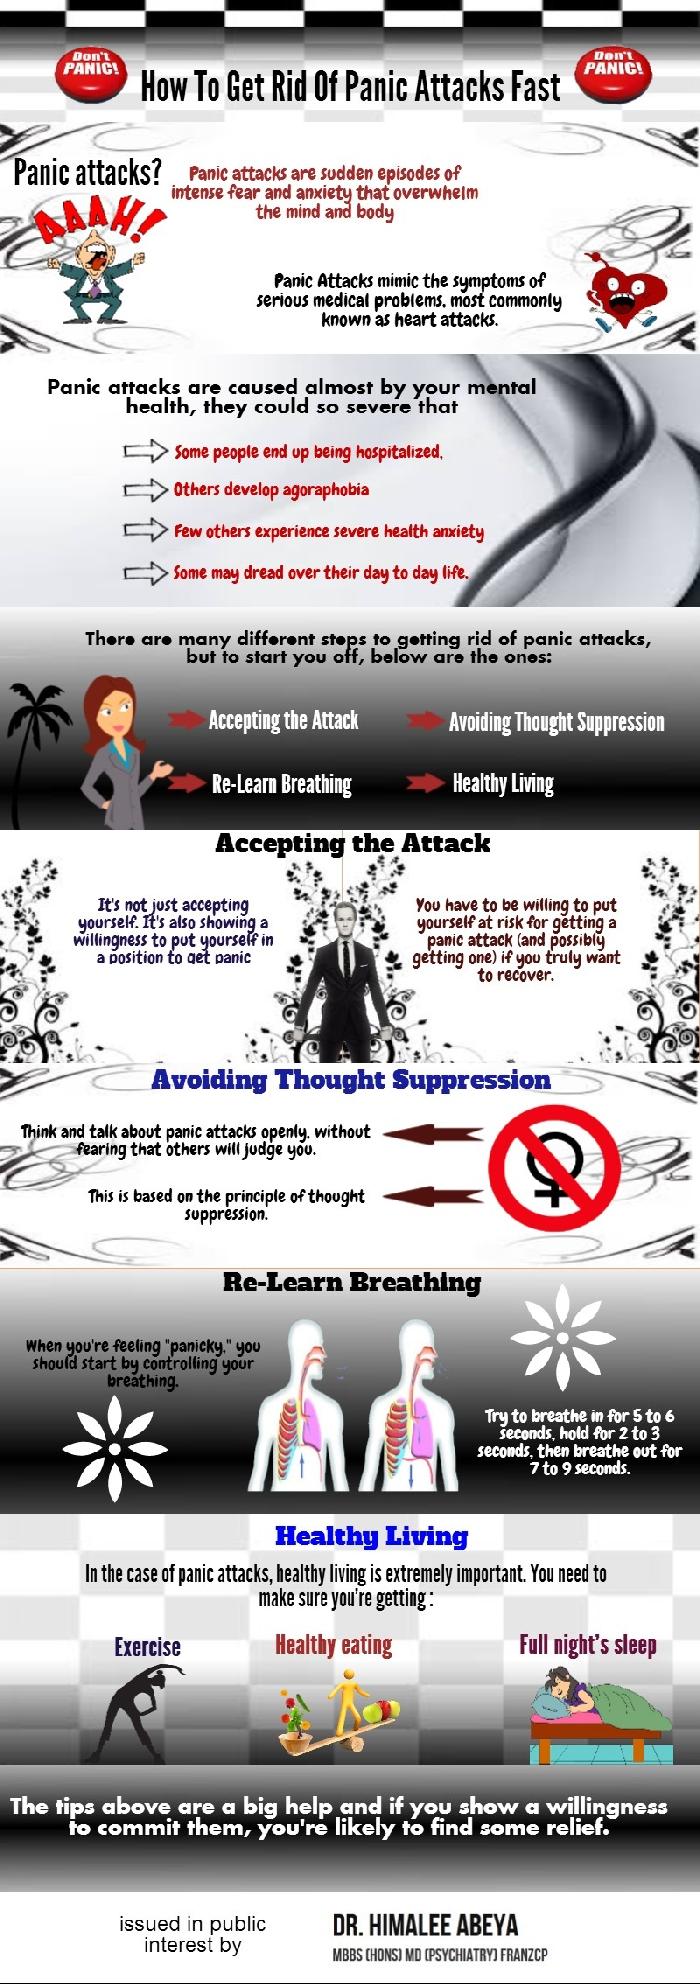 How To Get Rid Of Panic Attacks Fast